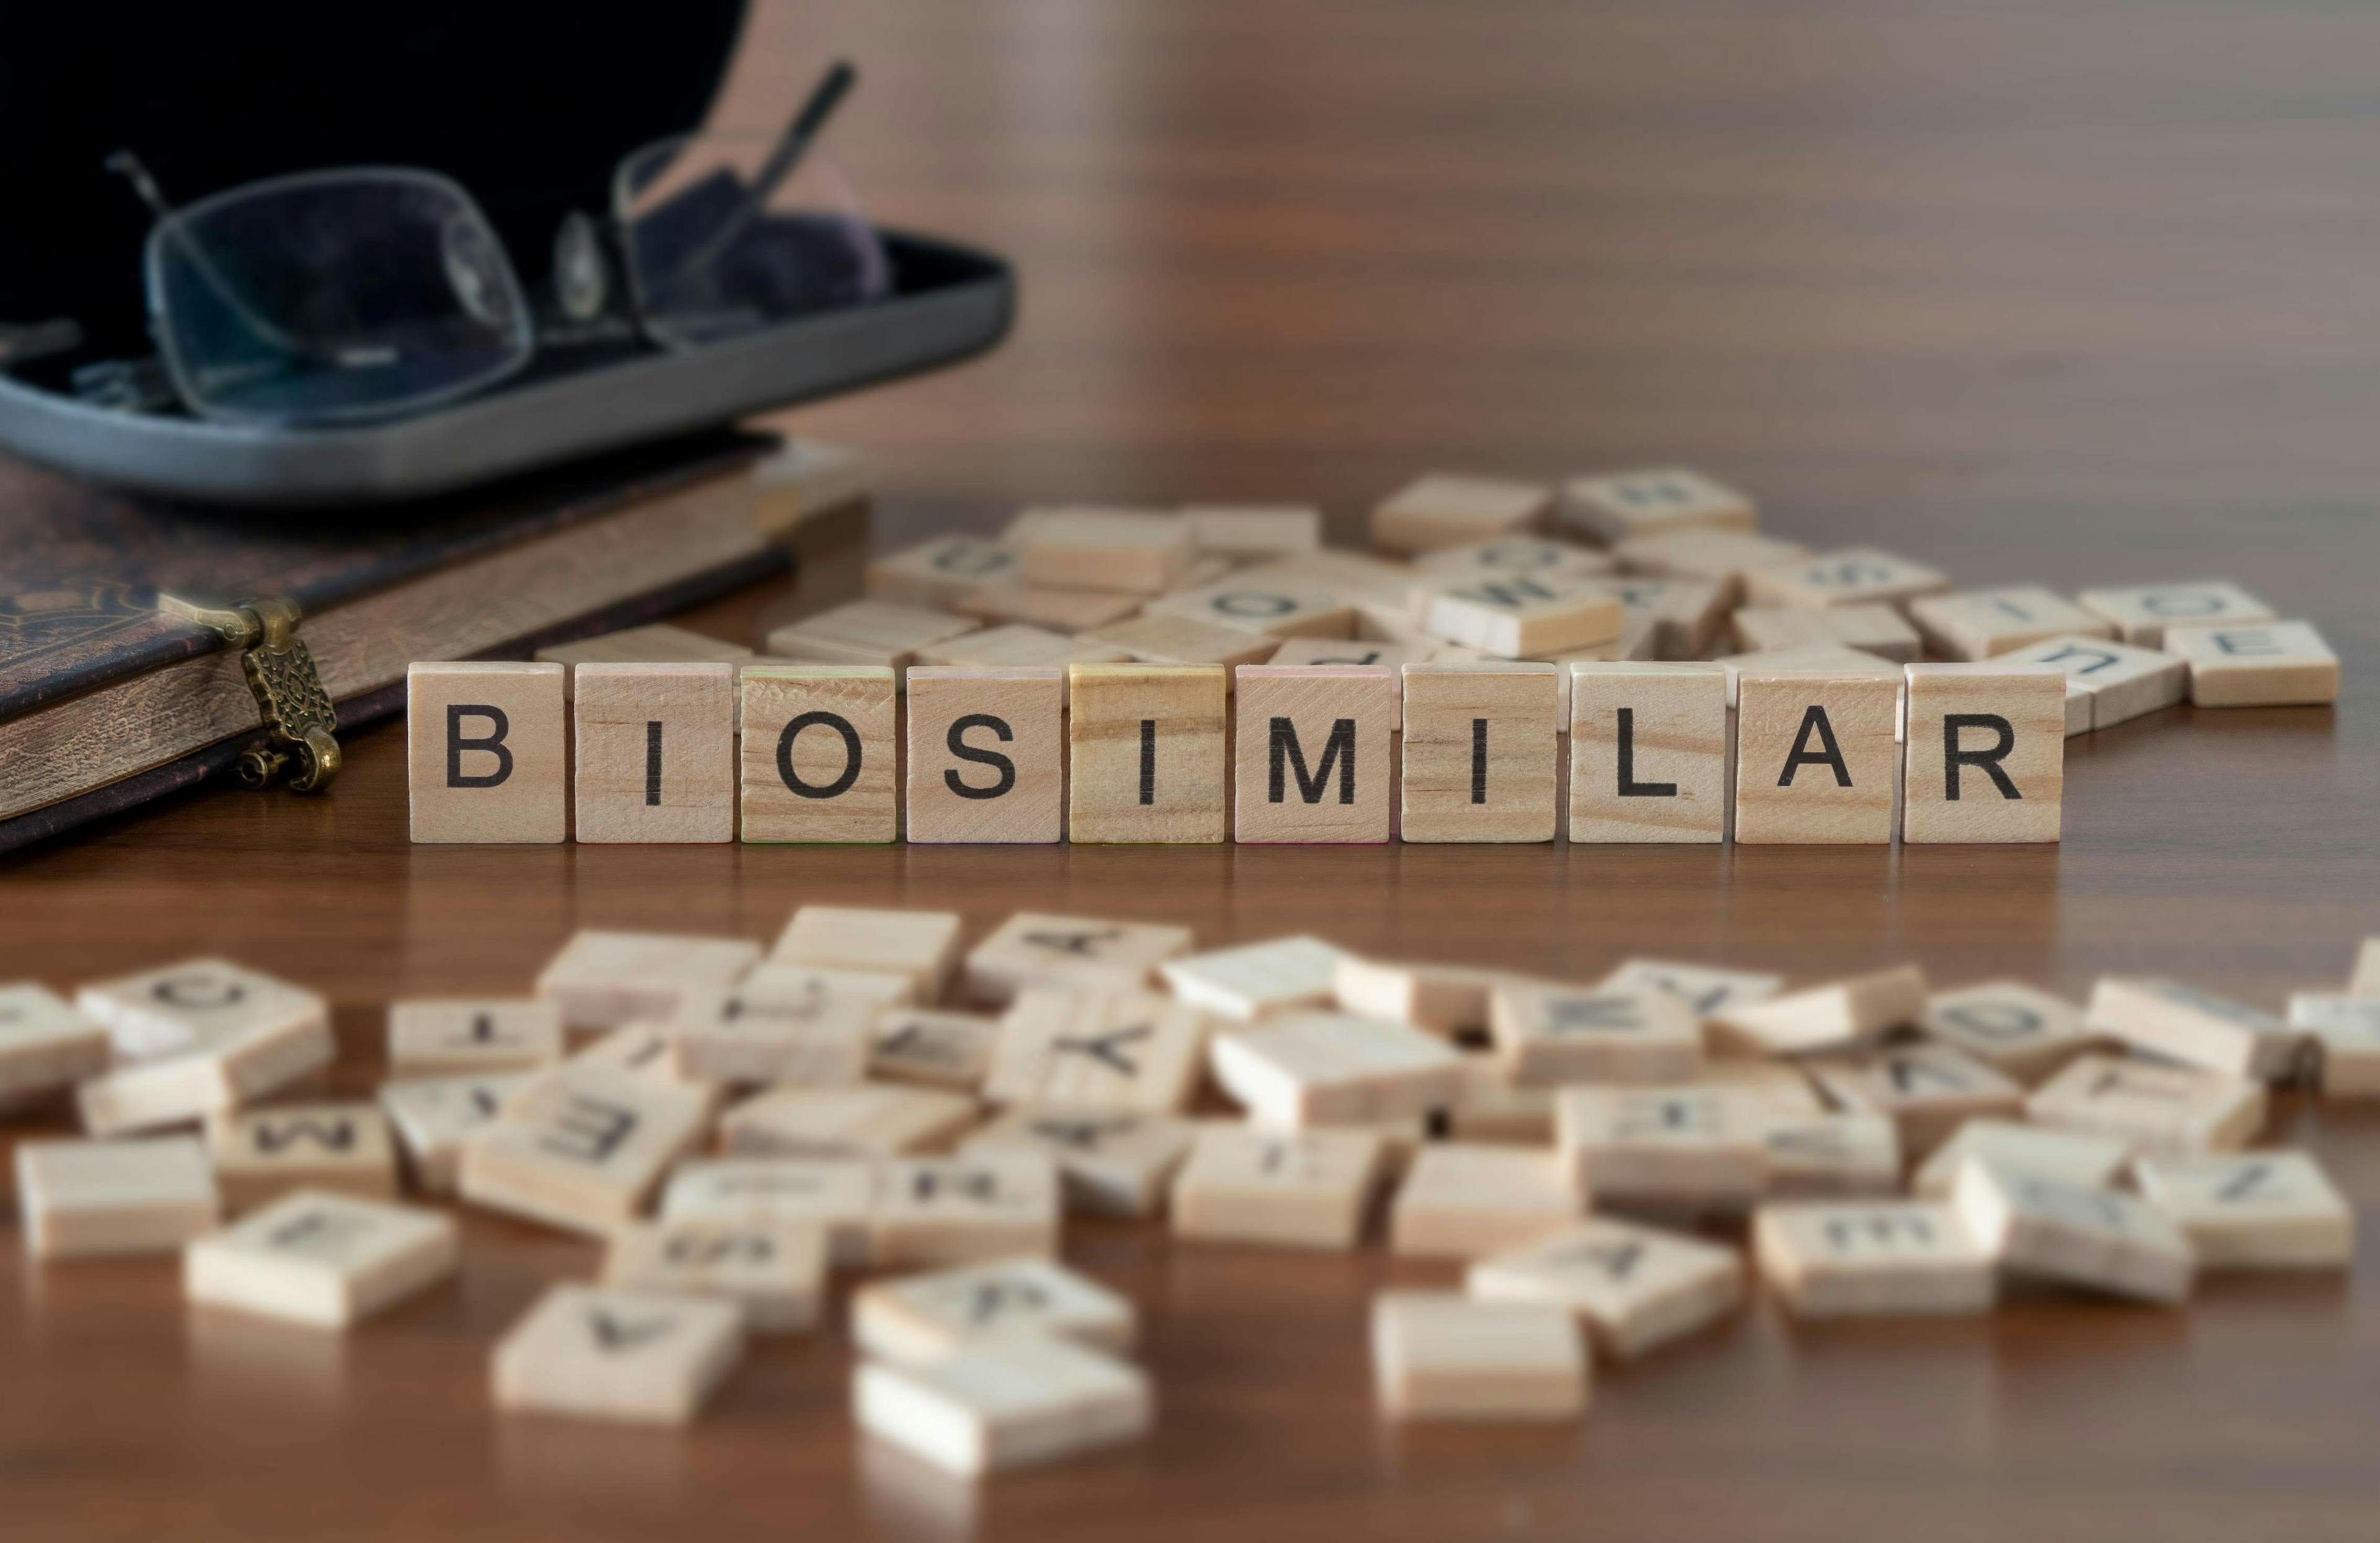 Biosimilar word or concept represented by wooden letter tiles on a wooden table with glasses and a book. Credit: lexiconimages - stock.adobe.com